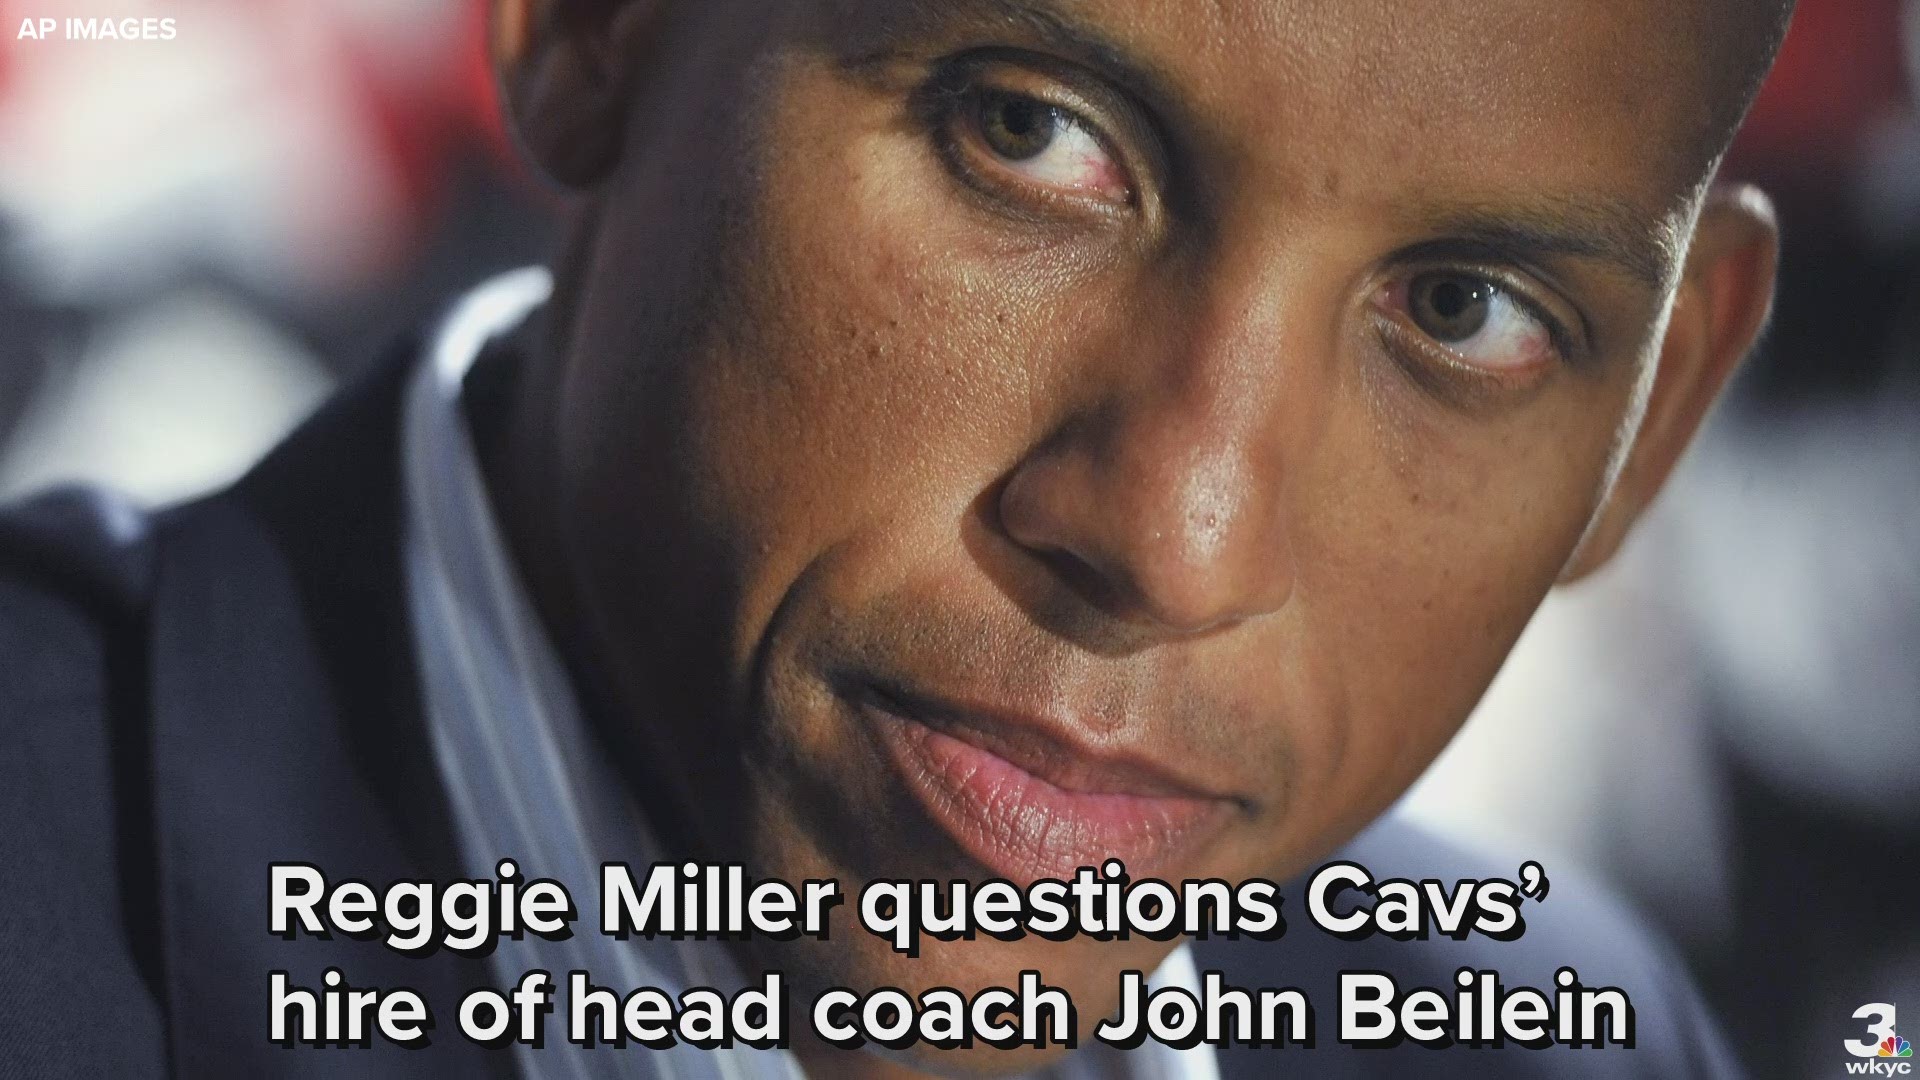 Basketball Hall of Famer Reggie Miller questions why the Cleveland Cavaliers decided to hire former University of Michigan coach John Beilein.